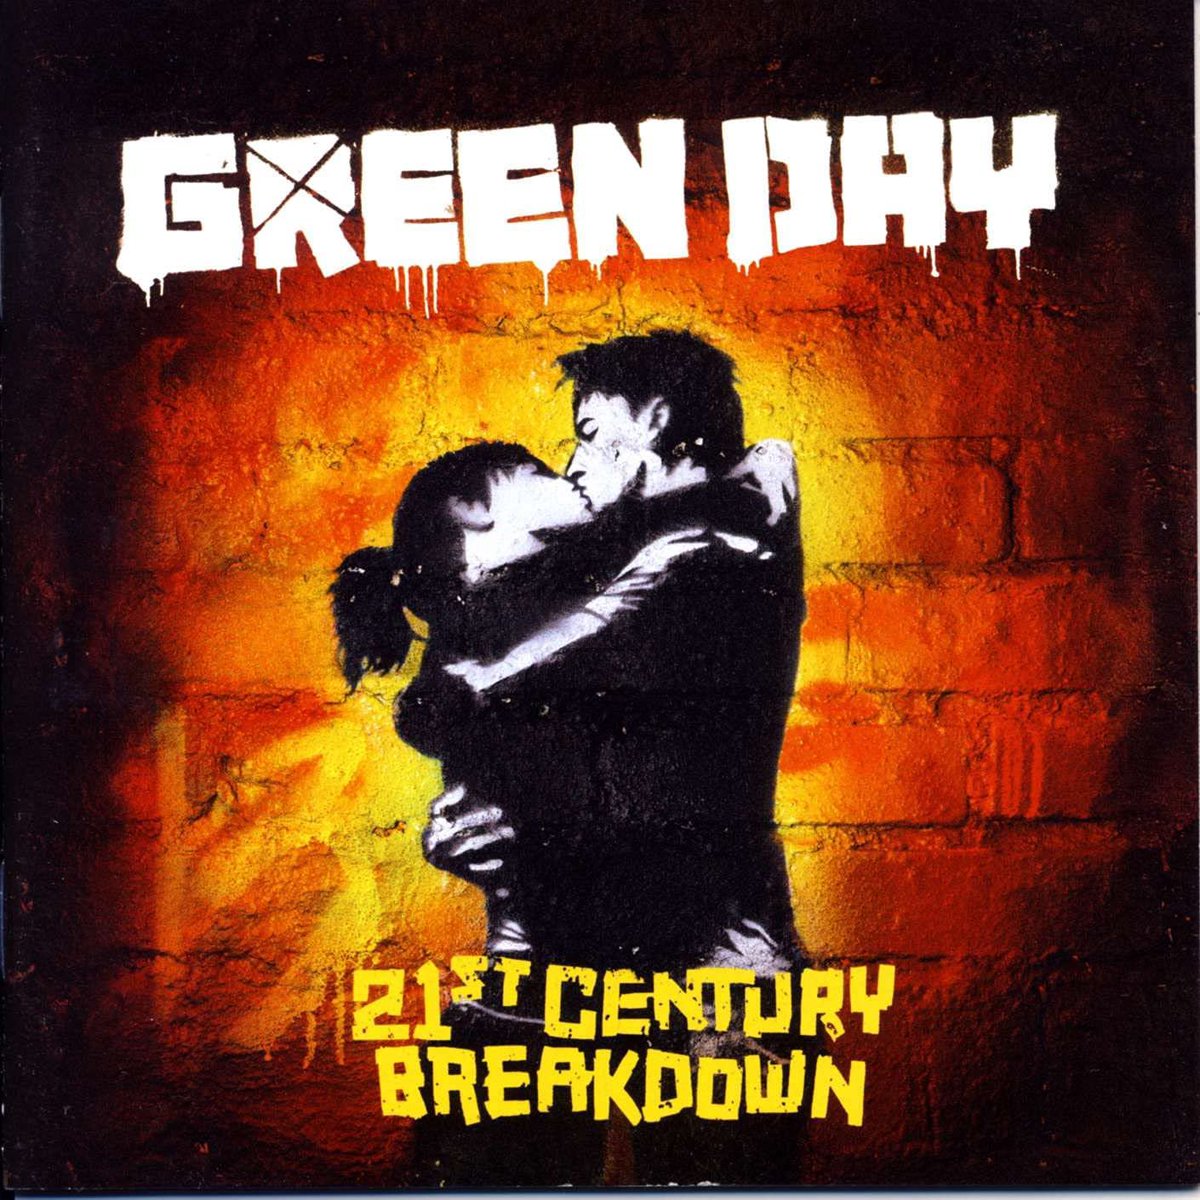 Green Day released ‘21st Century Breakdown’ 14 years ago today. What’s your favorite song?